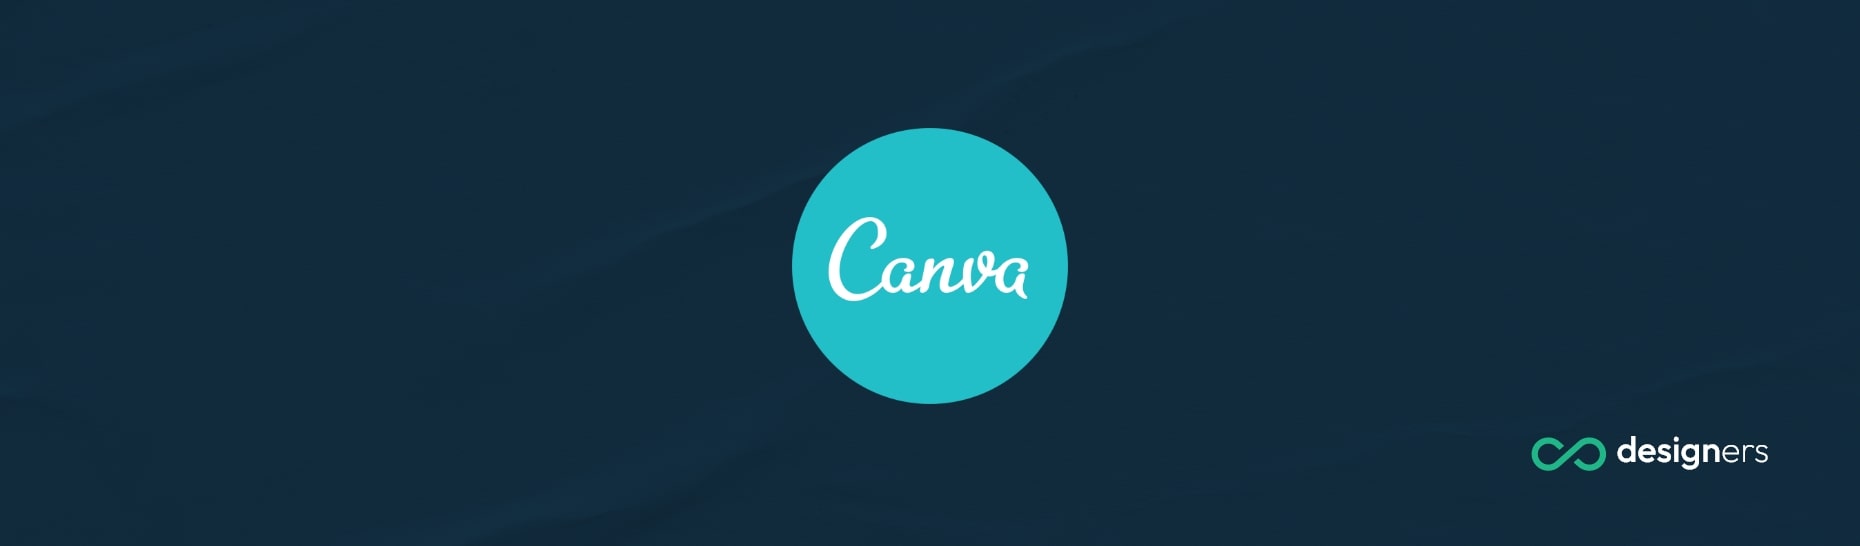 What Are Some Scary Fonts on Canva?